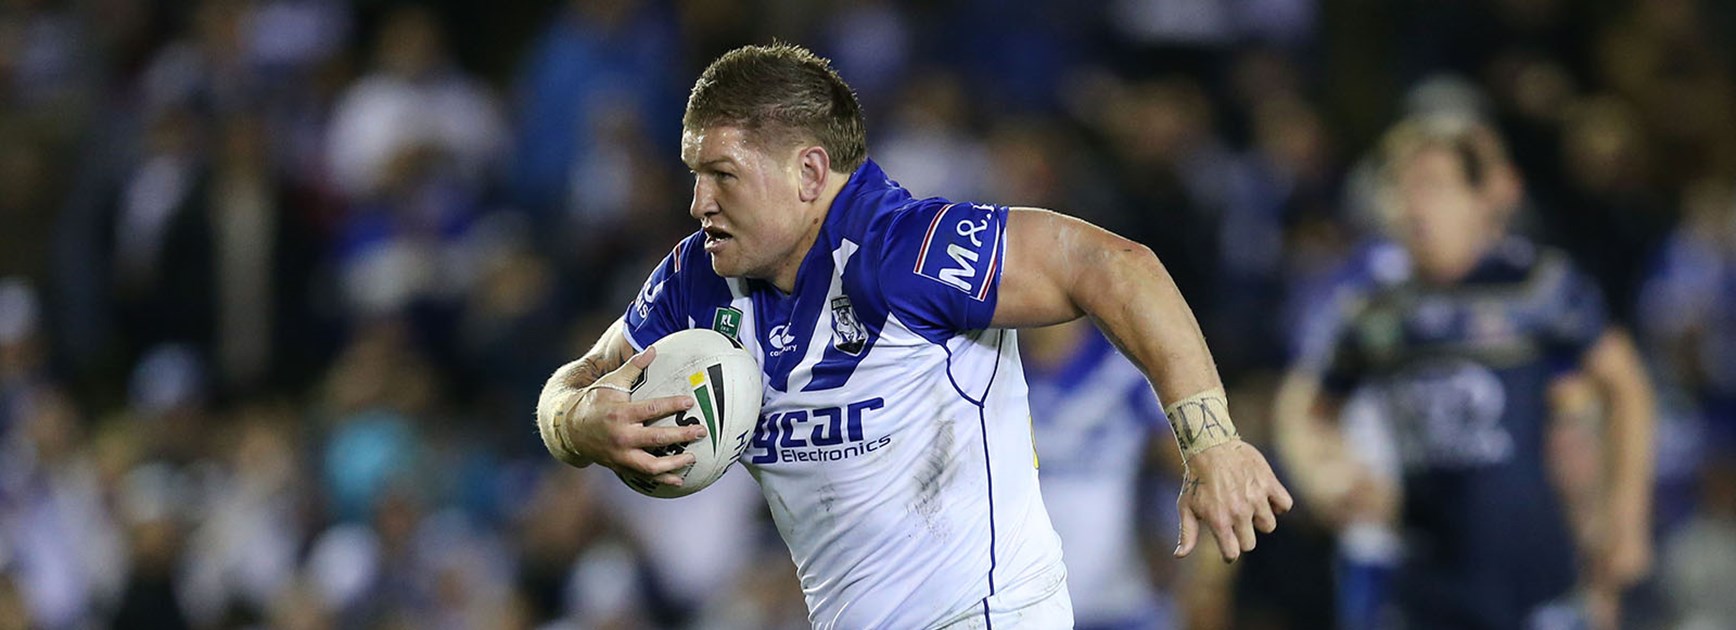 Greg Eastwood took an intercept and ran 50 metres to score at Belmore Sports Ground.